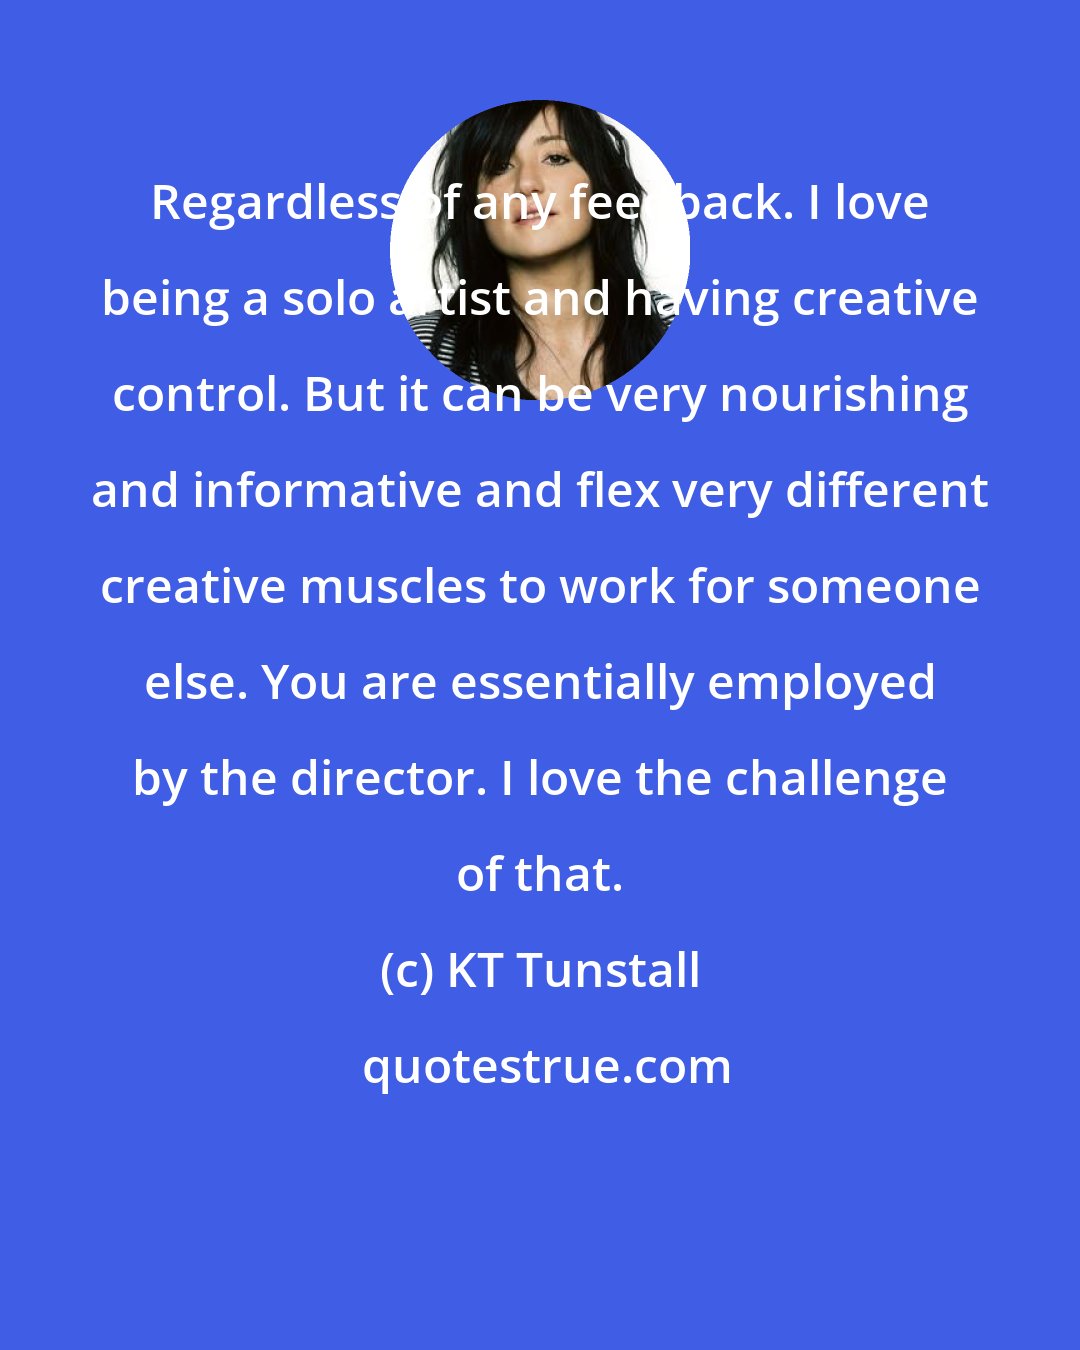 KT Tunstall: Regardless of any feedback. I love being a solo artist and having creative control. But it can be very nourishing and informative and flex very different creative muscles to work for someone else. You are essentially employed by the director. I love the challenge of that.